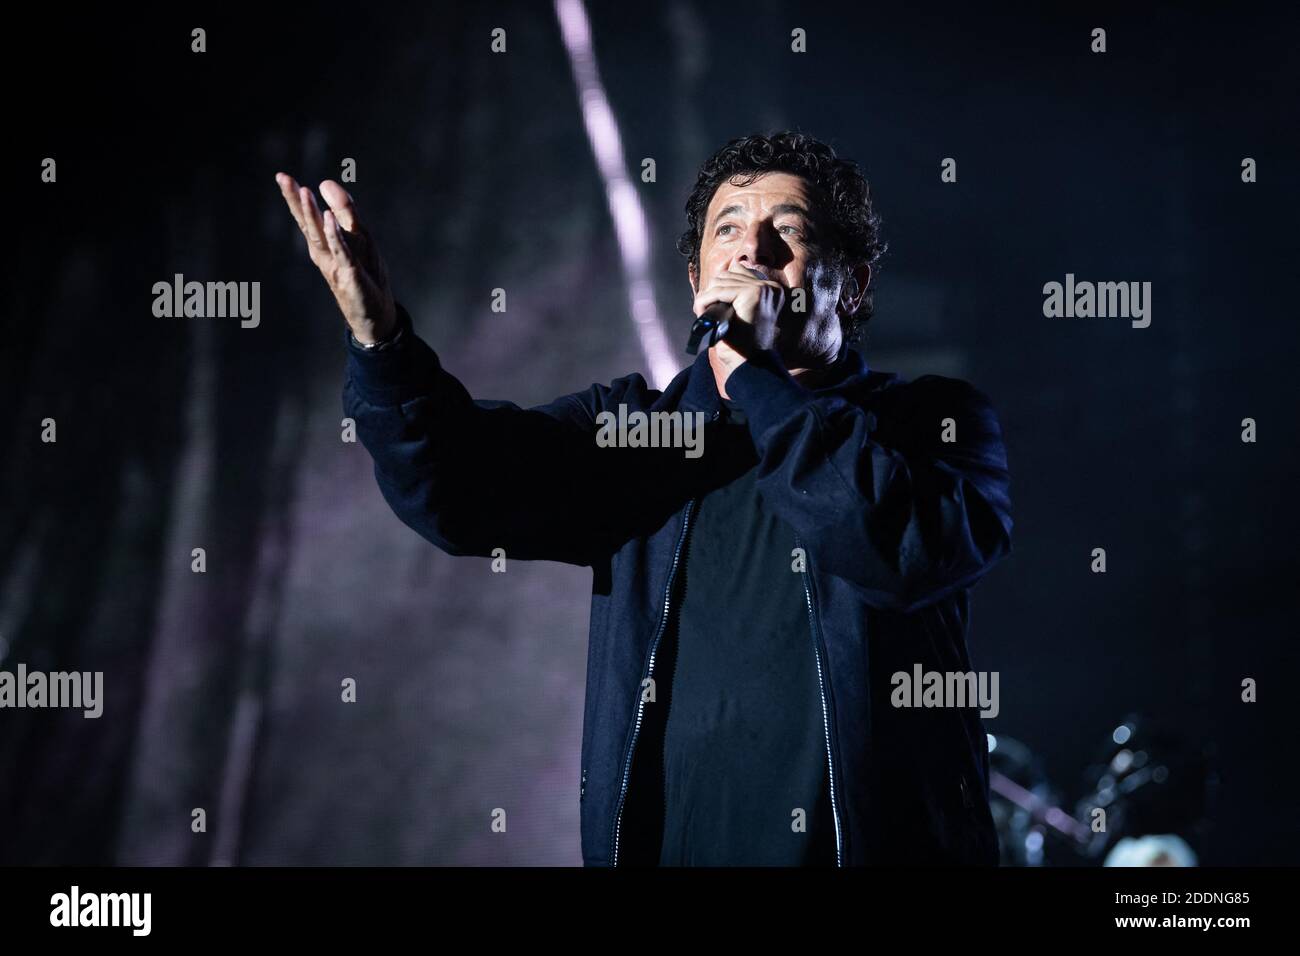 Patrick Bruel performs in concert at Paleo Festival in Nyon, Switzerland on  July 28, 2019. Photo by Loona/ABACAPRESS.COM Stock Photo - Alamy